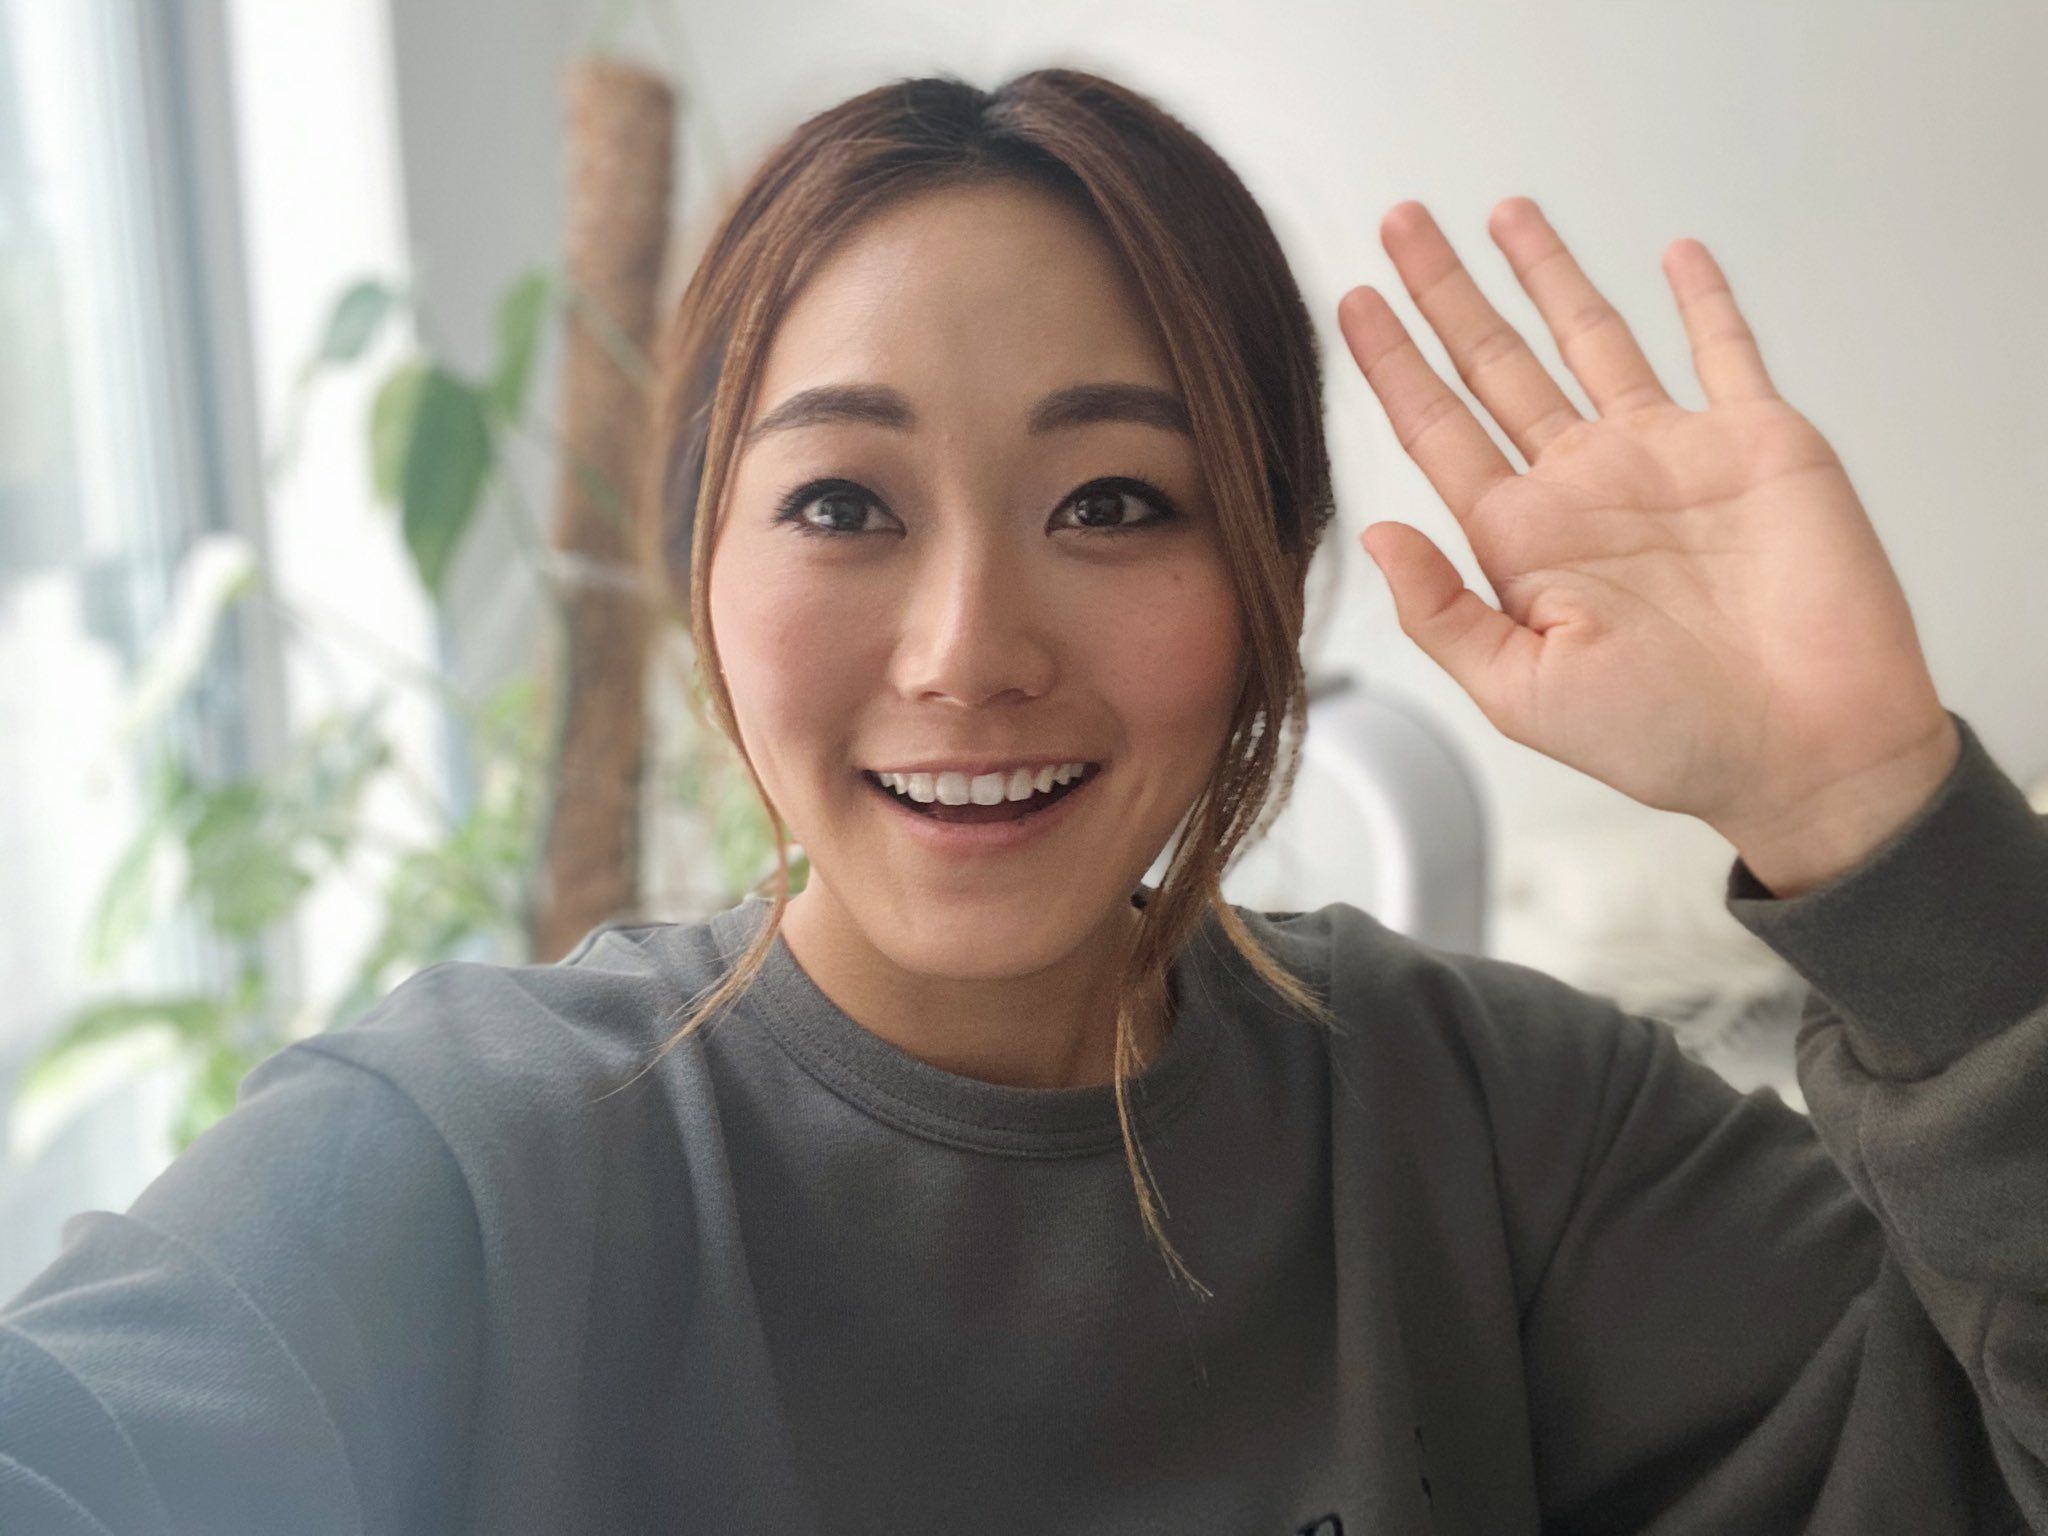 Karen Fukuhara on Twitter: Thank you so much for all of your questions! 